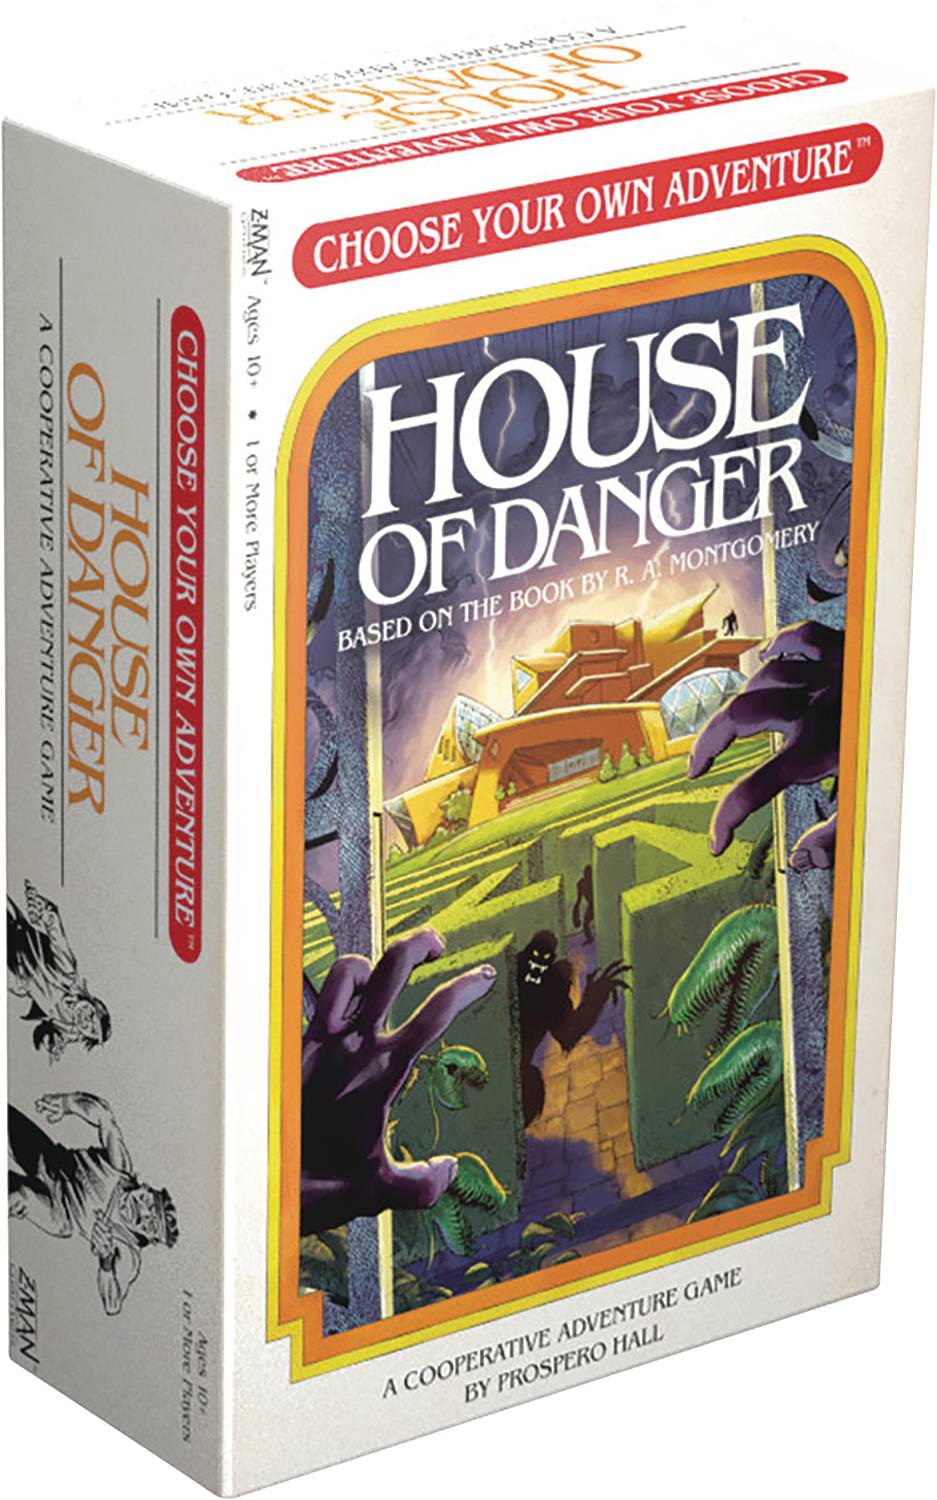 CHOOSE YOUR OWN ADVENTURE HOUSE OF DANGER GAME (Net) (C: 0-1